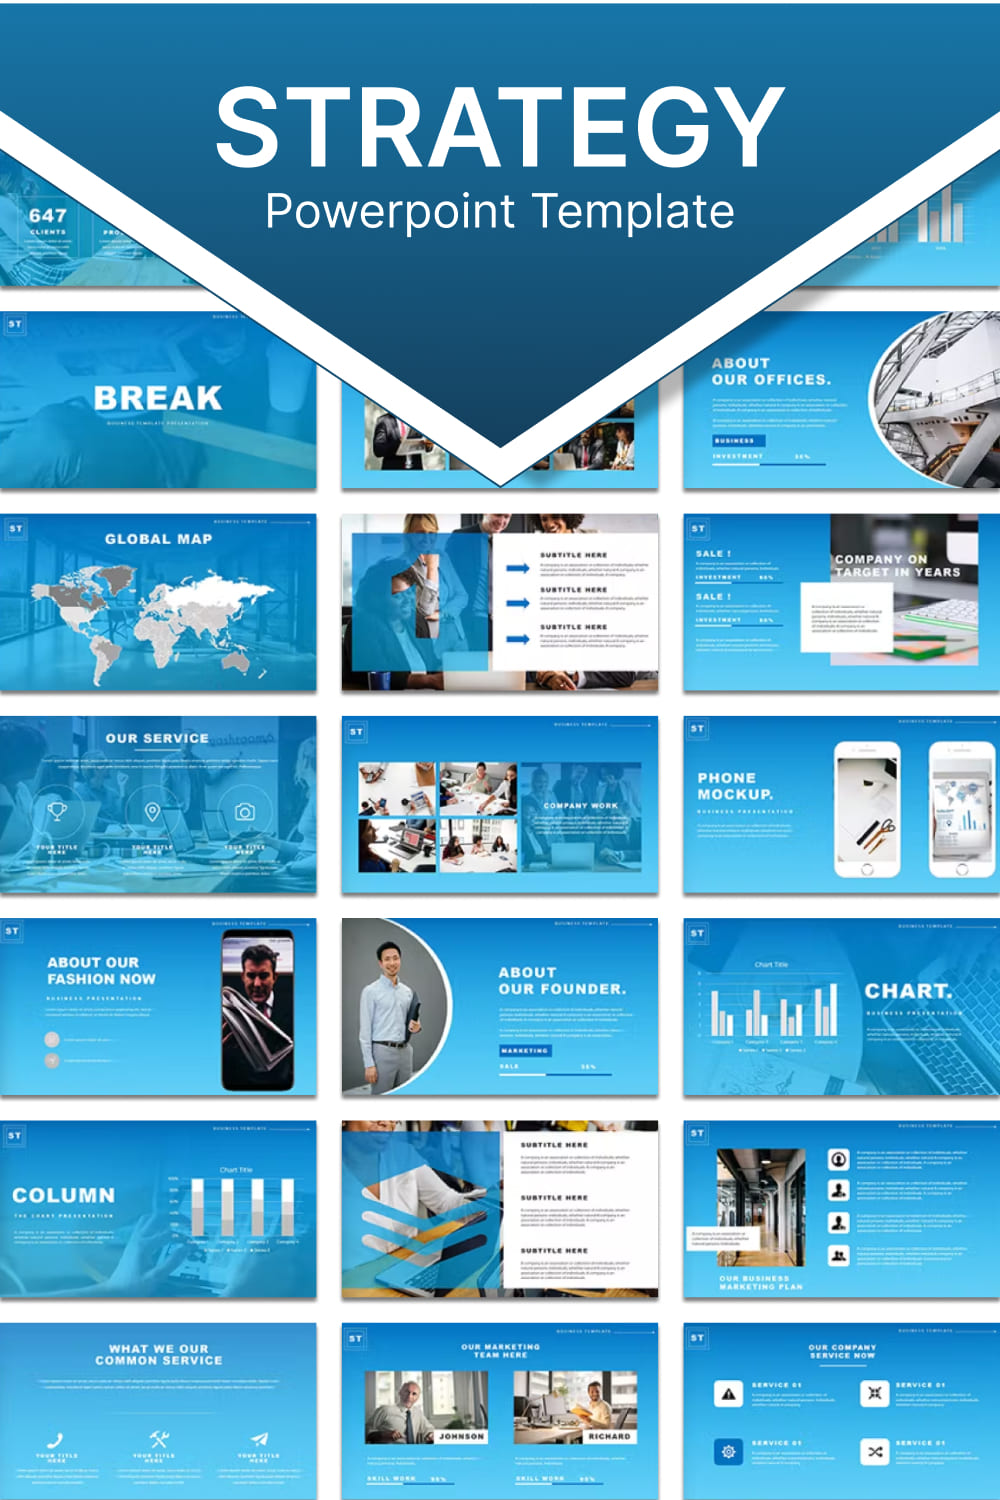 Strategy powerpoint template - Pinterest image preview.